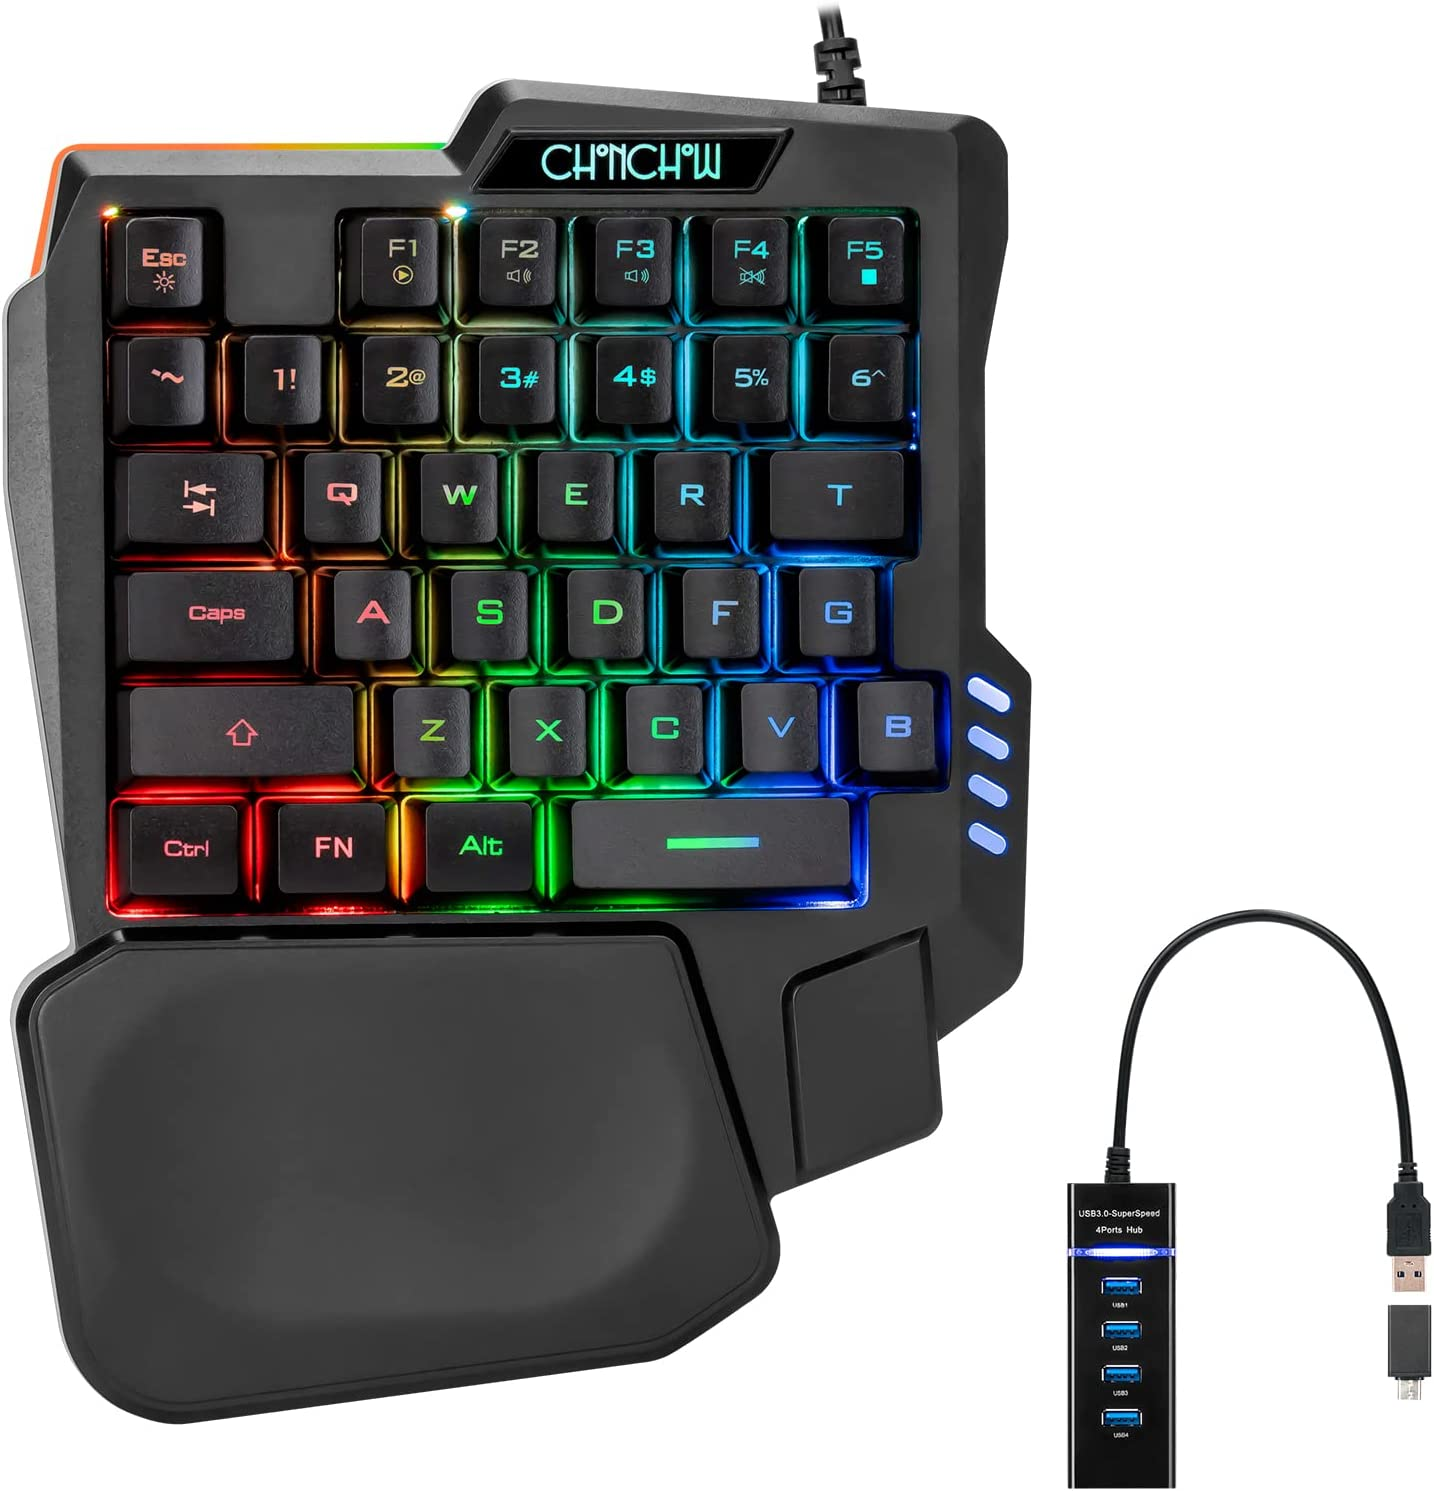 A one-handed gaming keyboard is perfect for gamers that use only one hand.